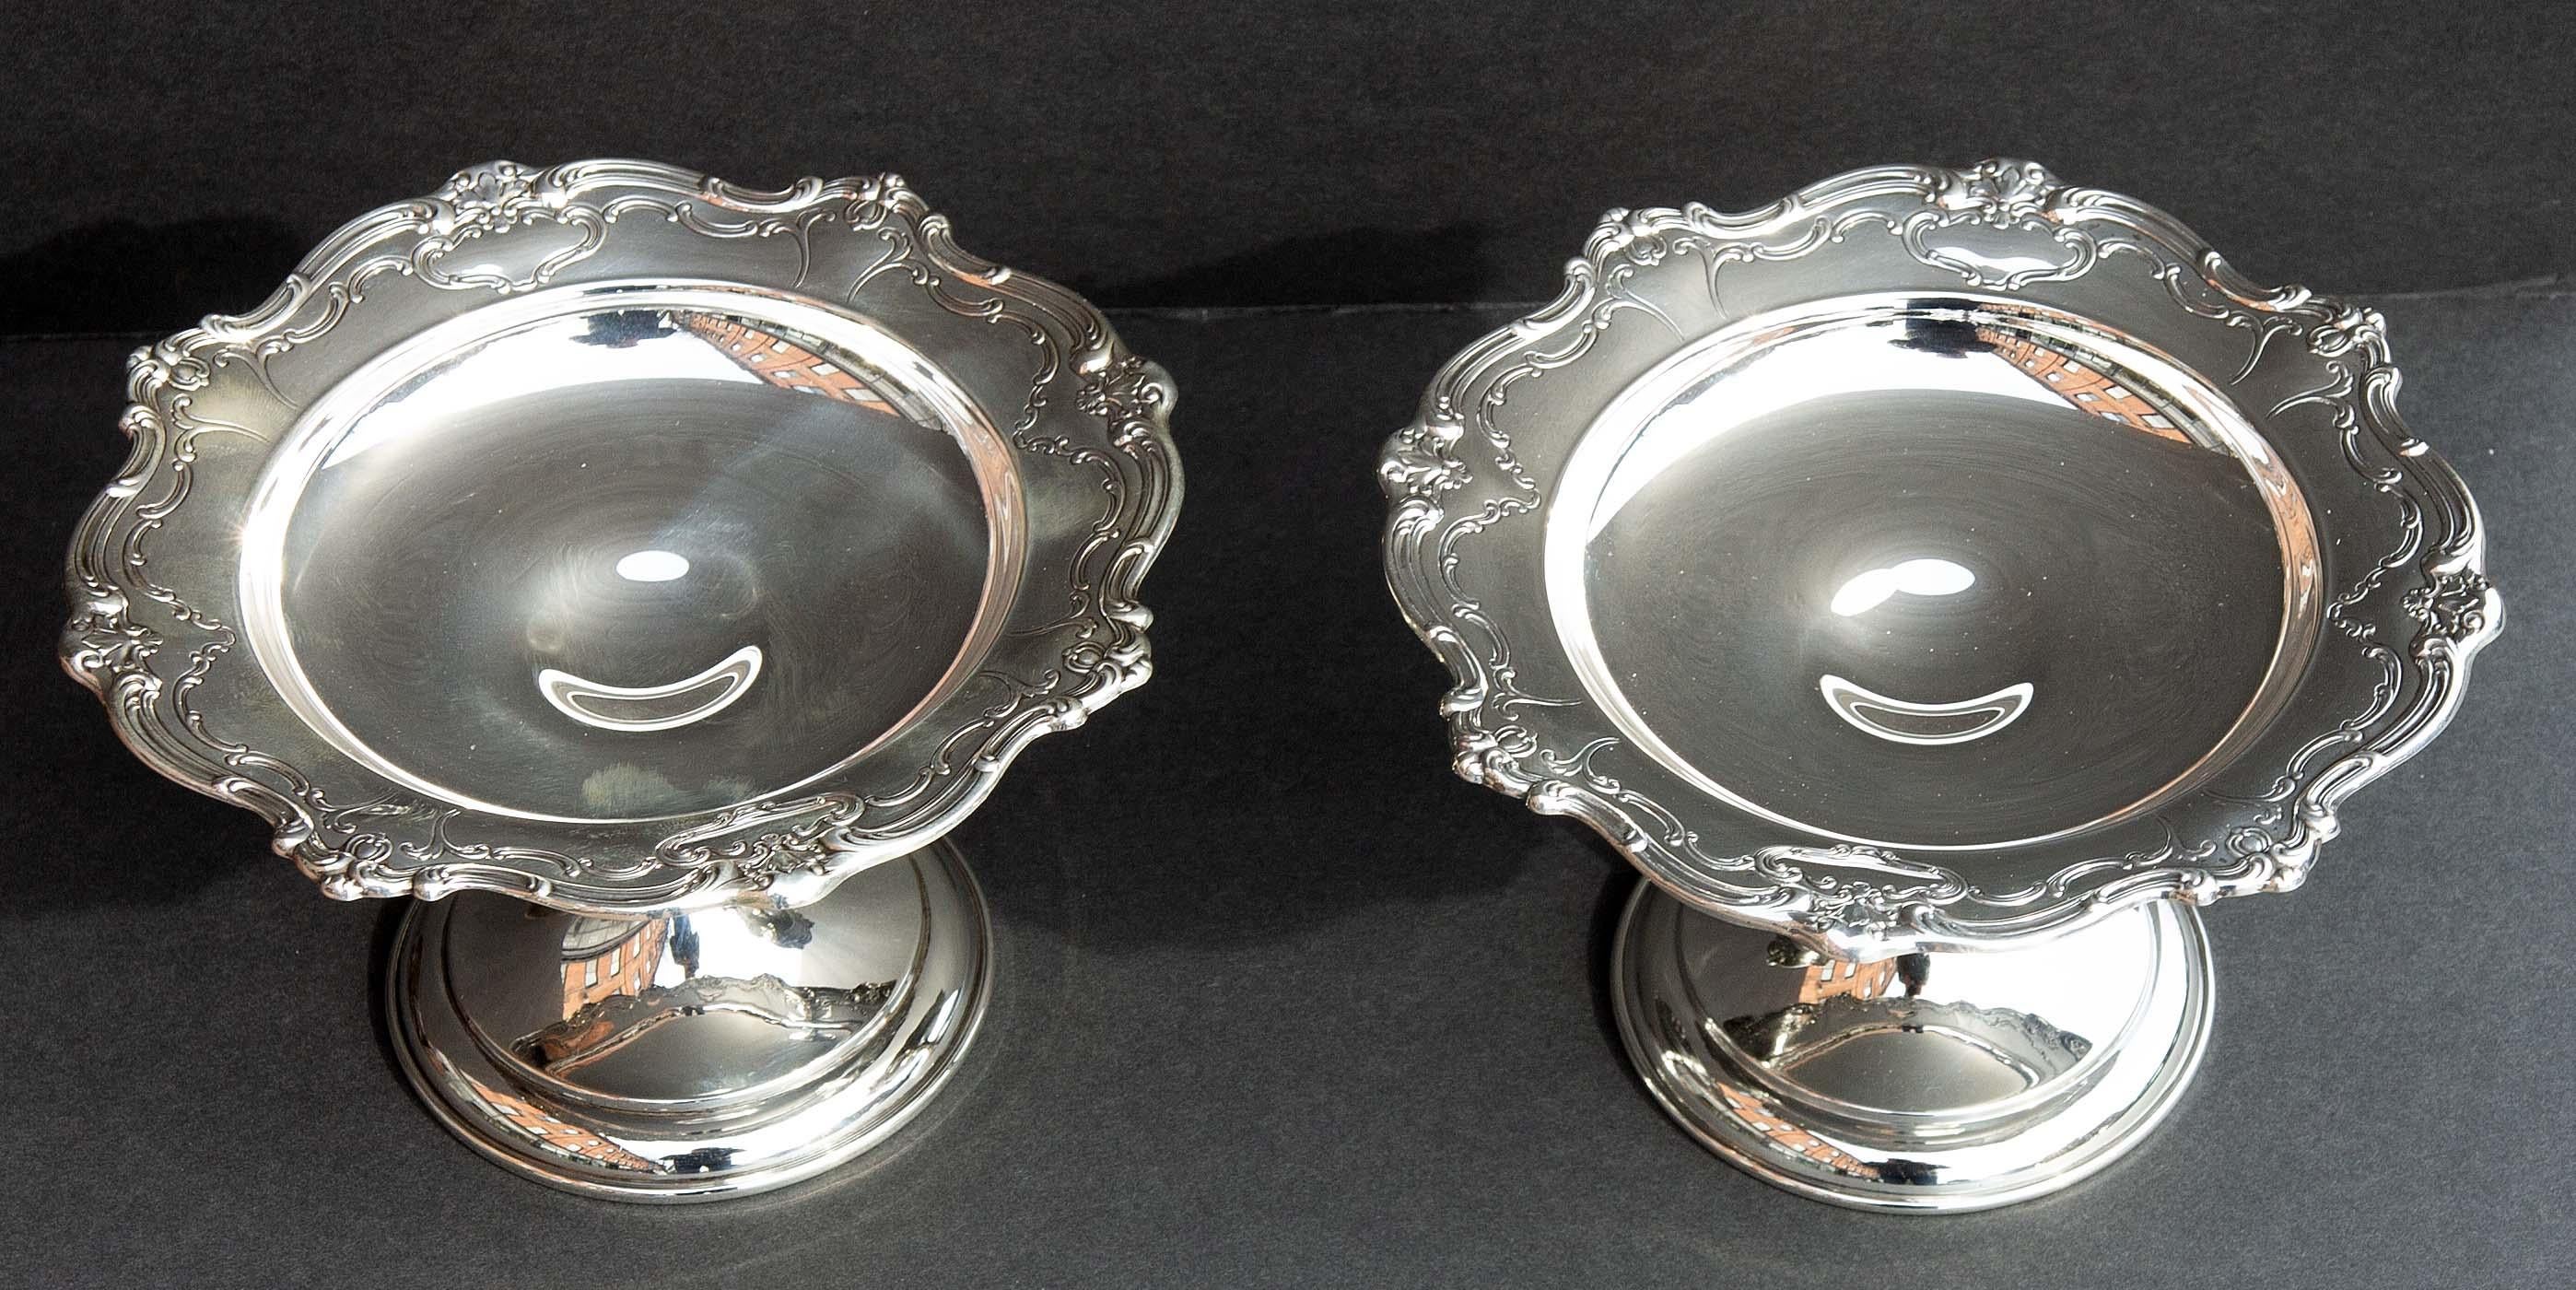 Pair of sterling compotes. Made by Gorham.